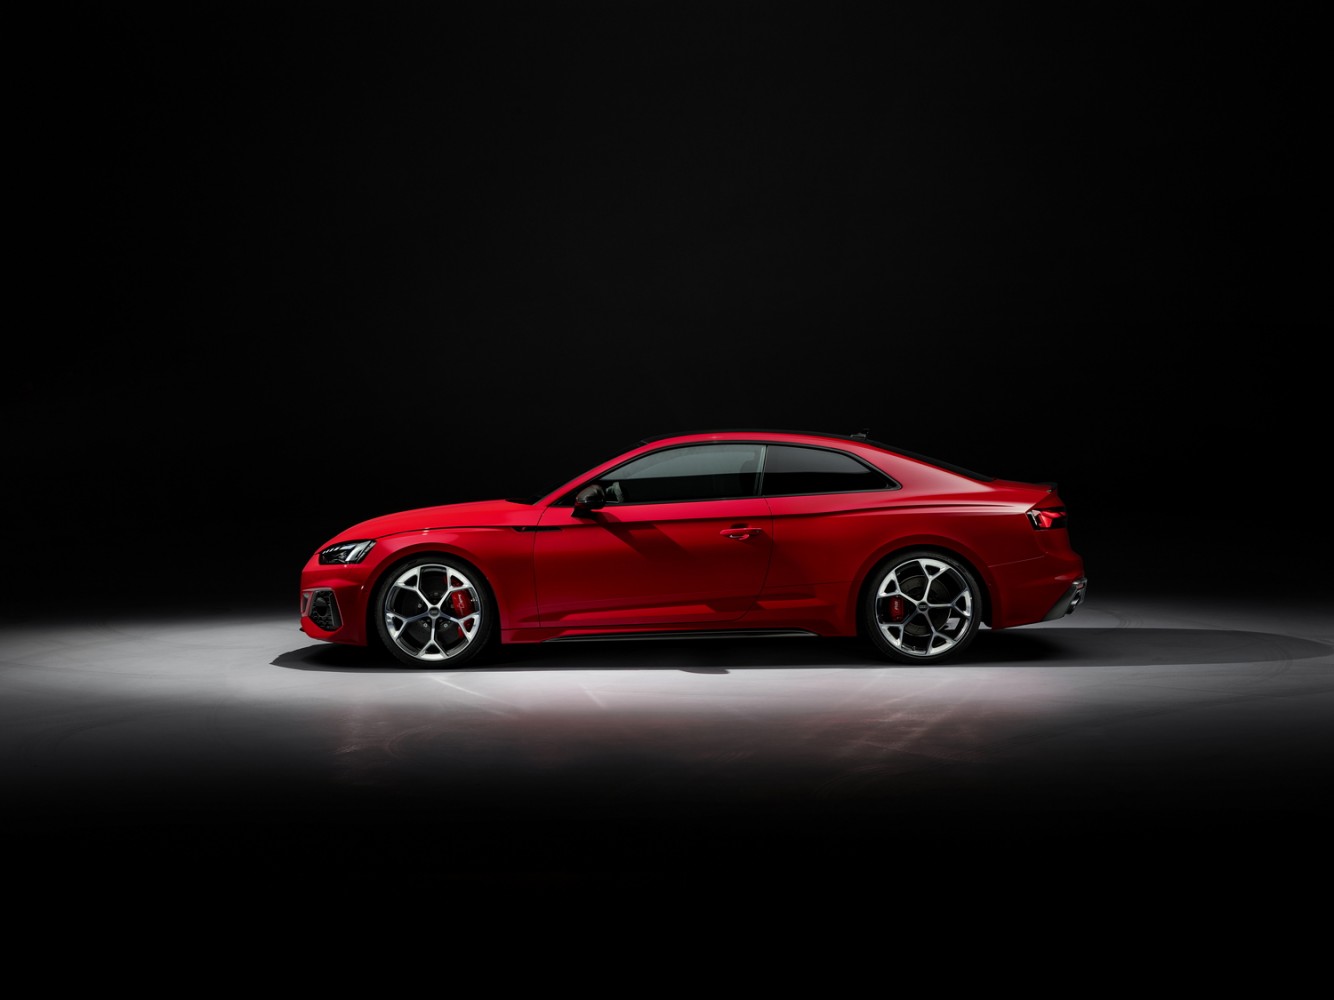 Car News | Audi upgrades the RS 5 and RS 4 Avant